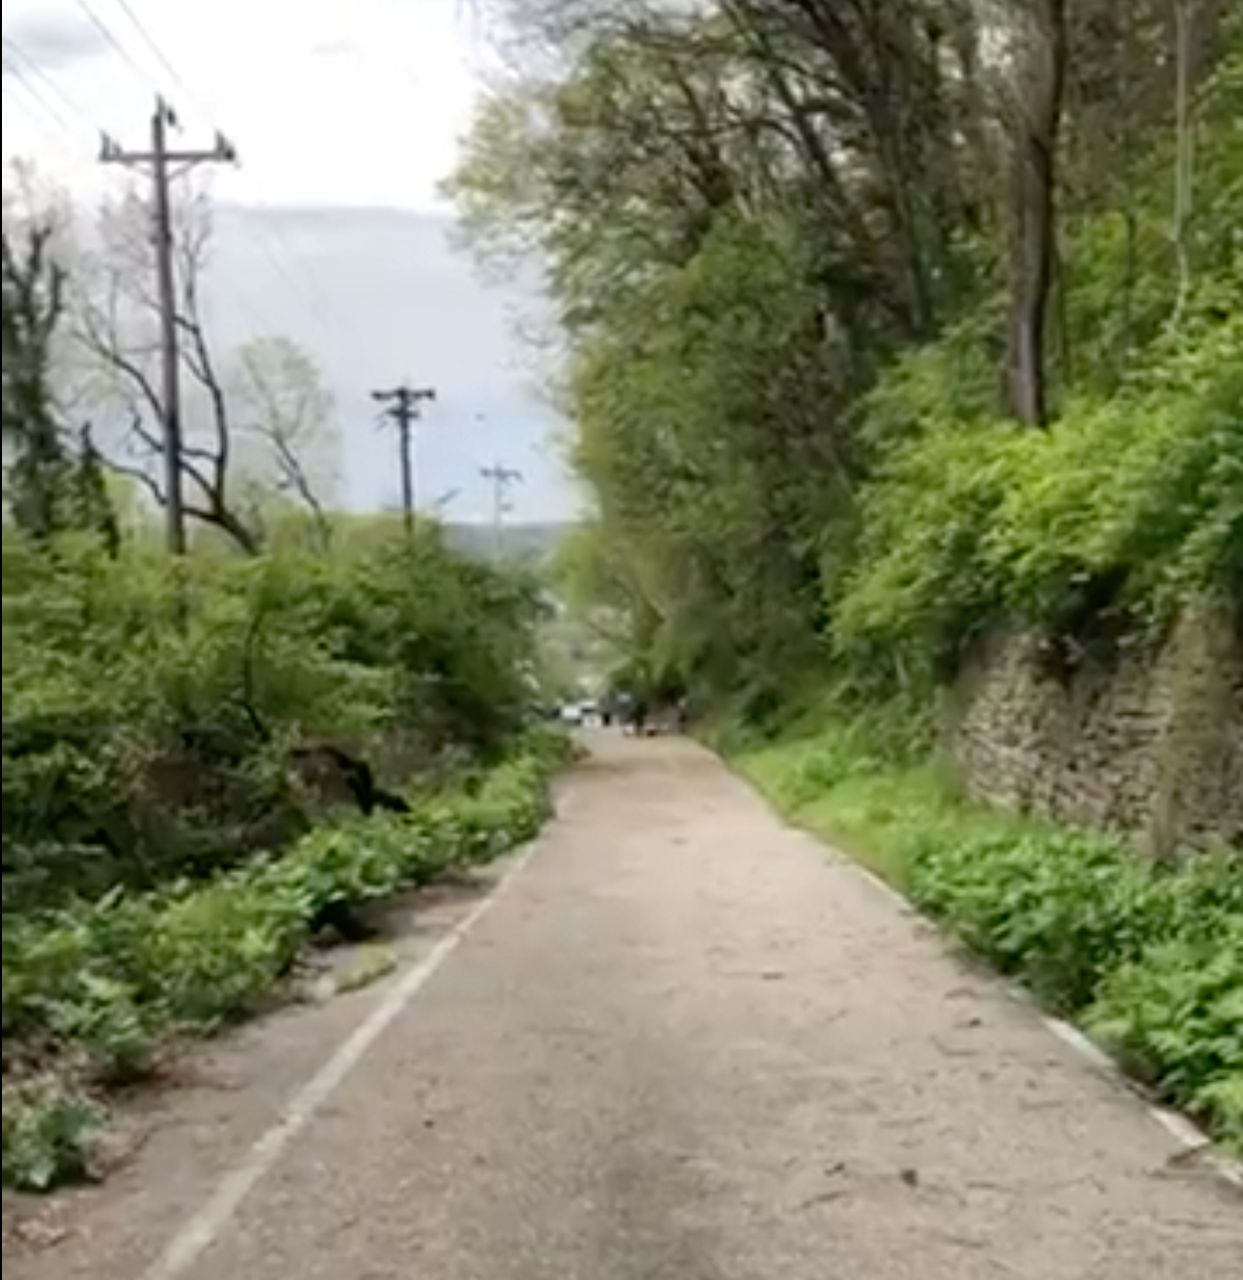 This stretch of Maryland Avenue was a known hotbed for illegal activity because it was overgrown and rundown. Grant funds are helping to turn it into an everyday walking and riding trail for west side residents. (Photo courtesy of Price Hill Will)